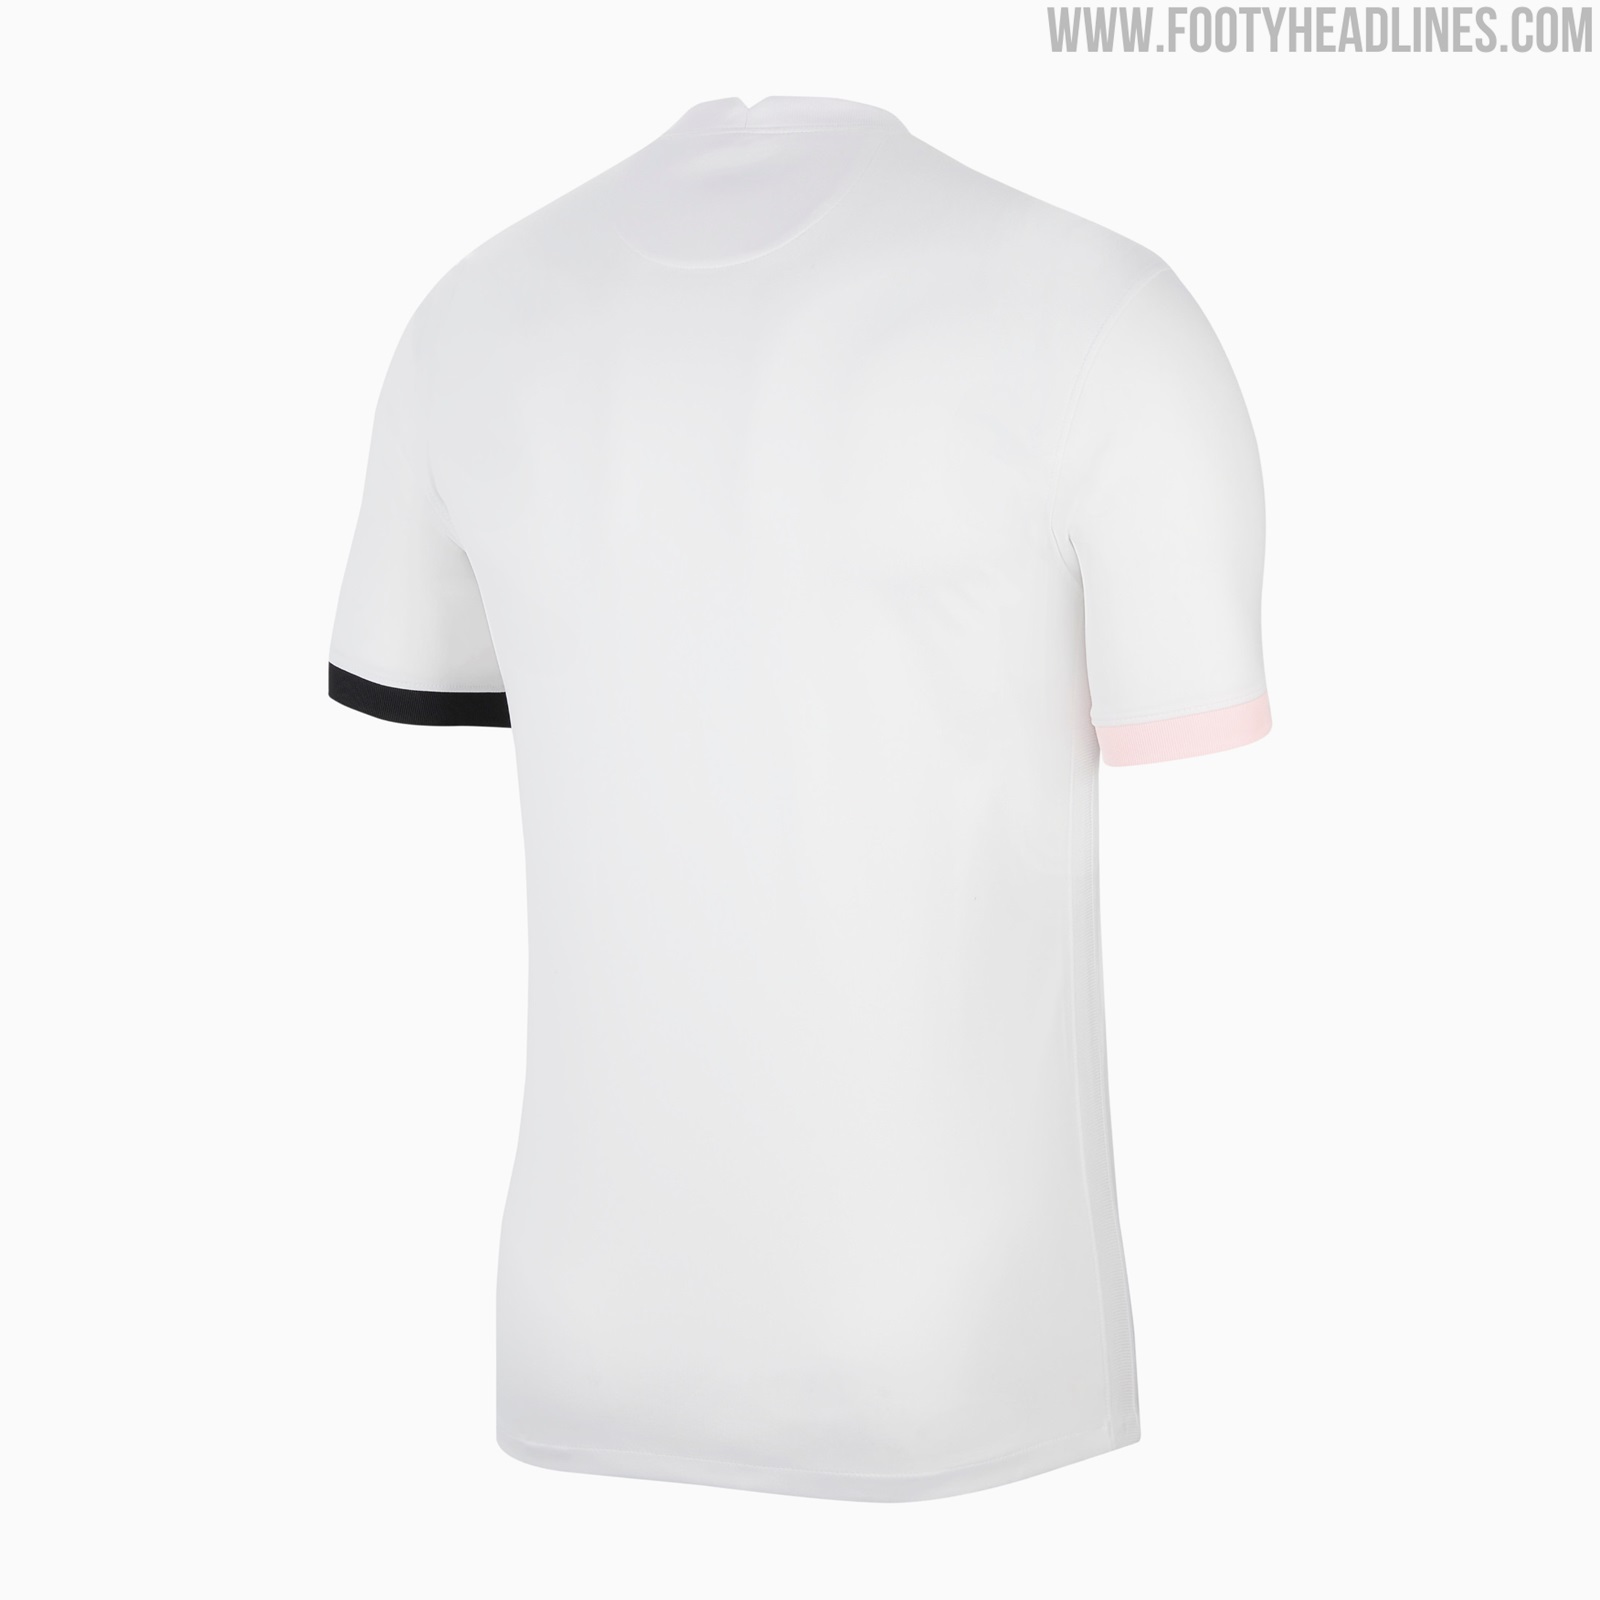 This Is How The PSG 21-22 Away Kit Could Look Like - Footy Headlines